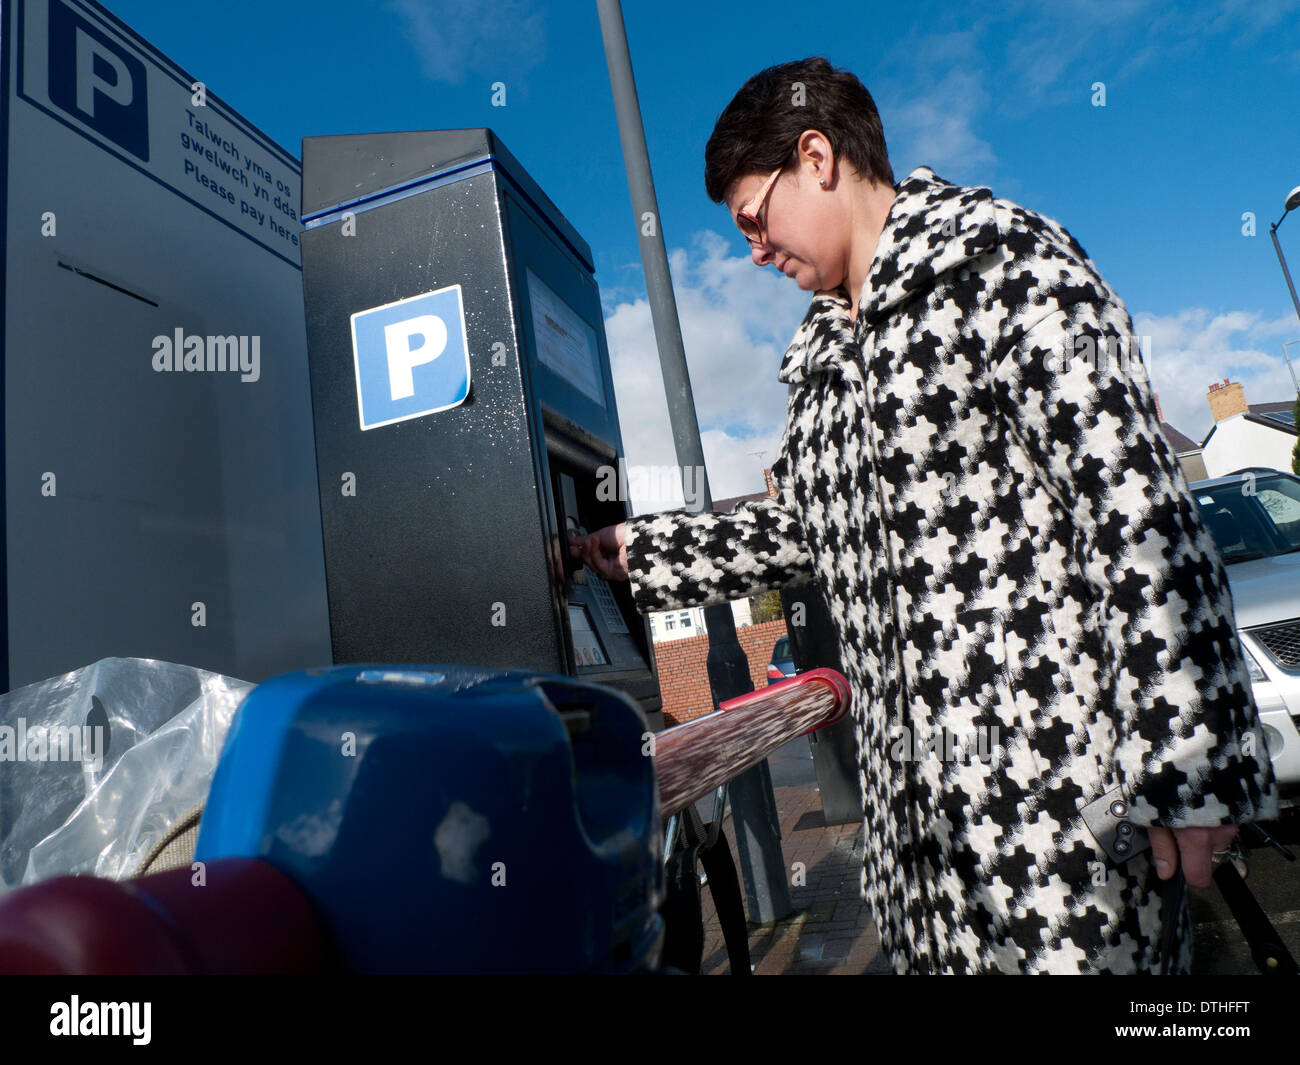 A woman in a houndstooth pattern fabric check coat putting money into a parking machine in a supermarket carpark UK KATHY DEWITT Stock Photo